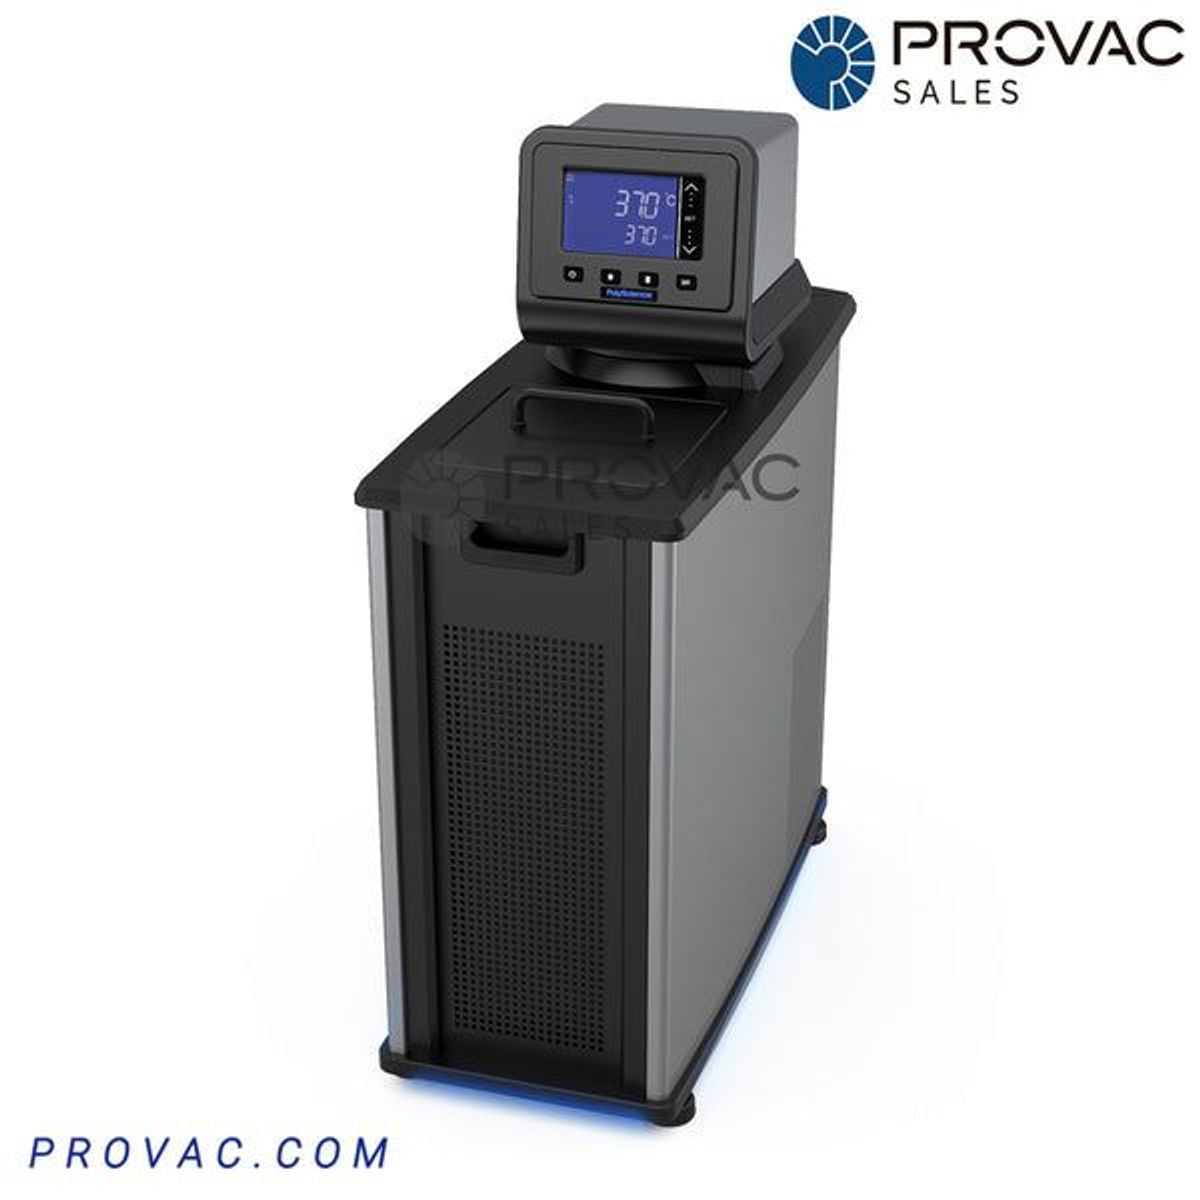 PolyScience 7 Liter Refrigerated Circulator with Digital Controller Image 1